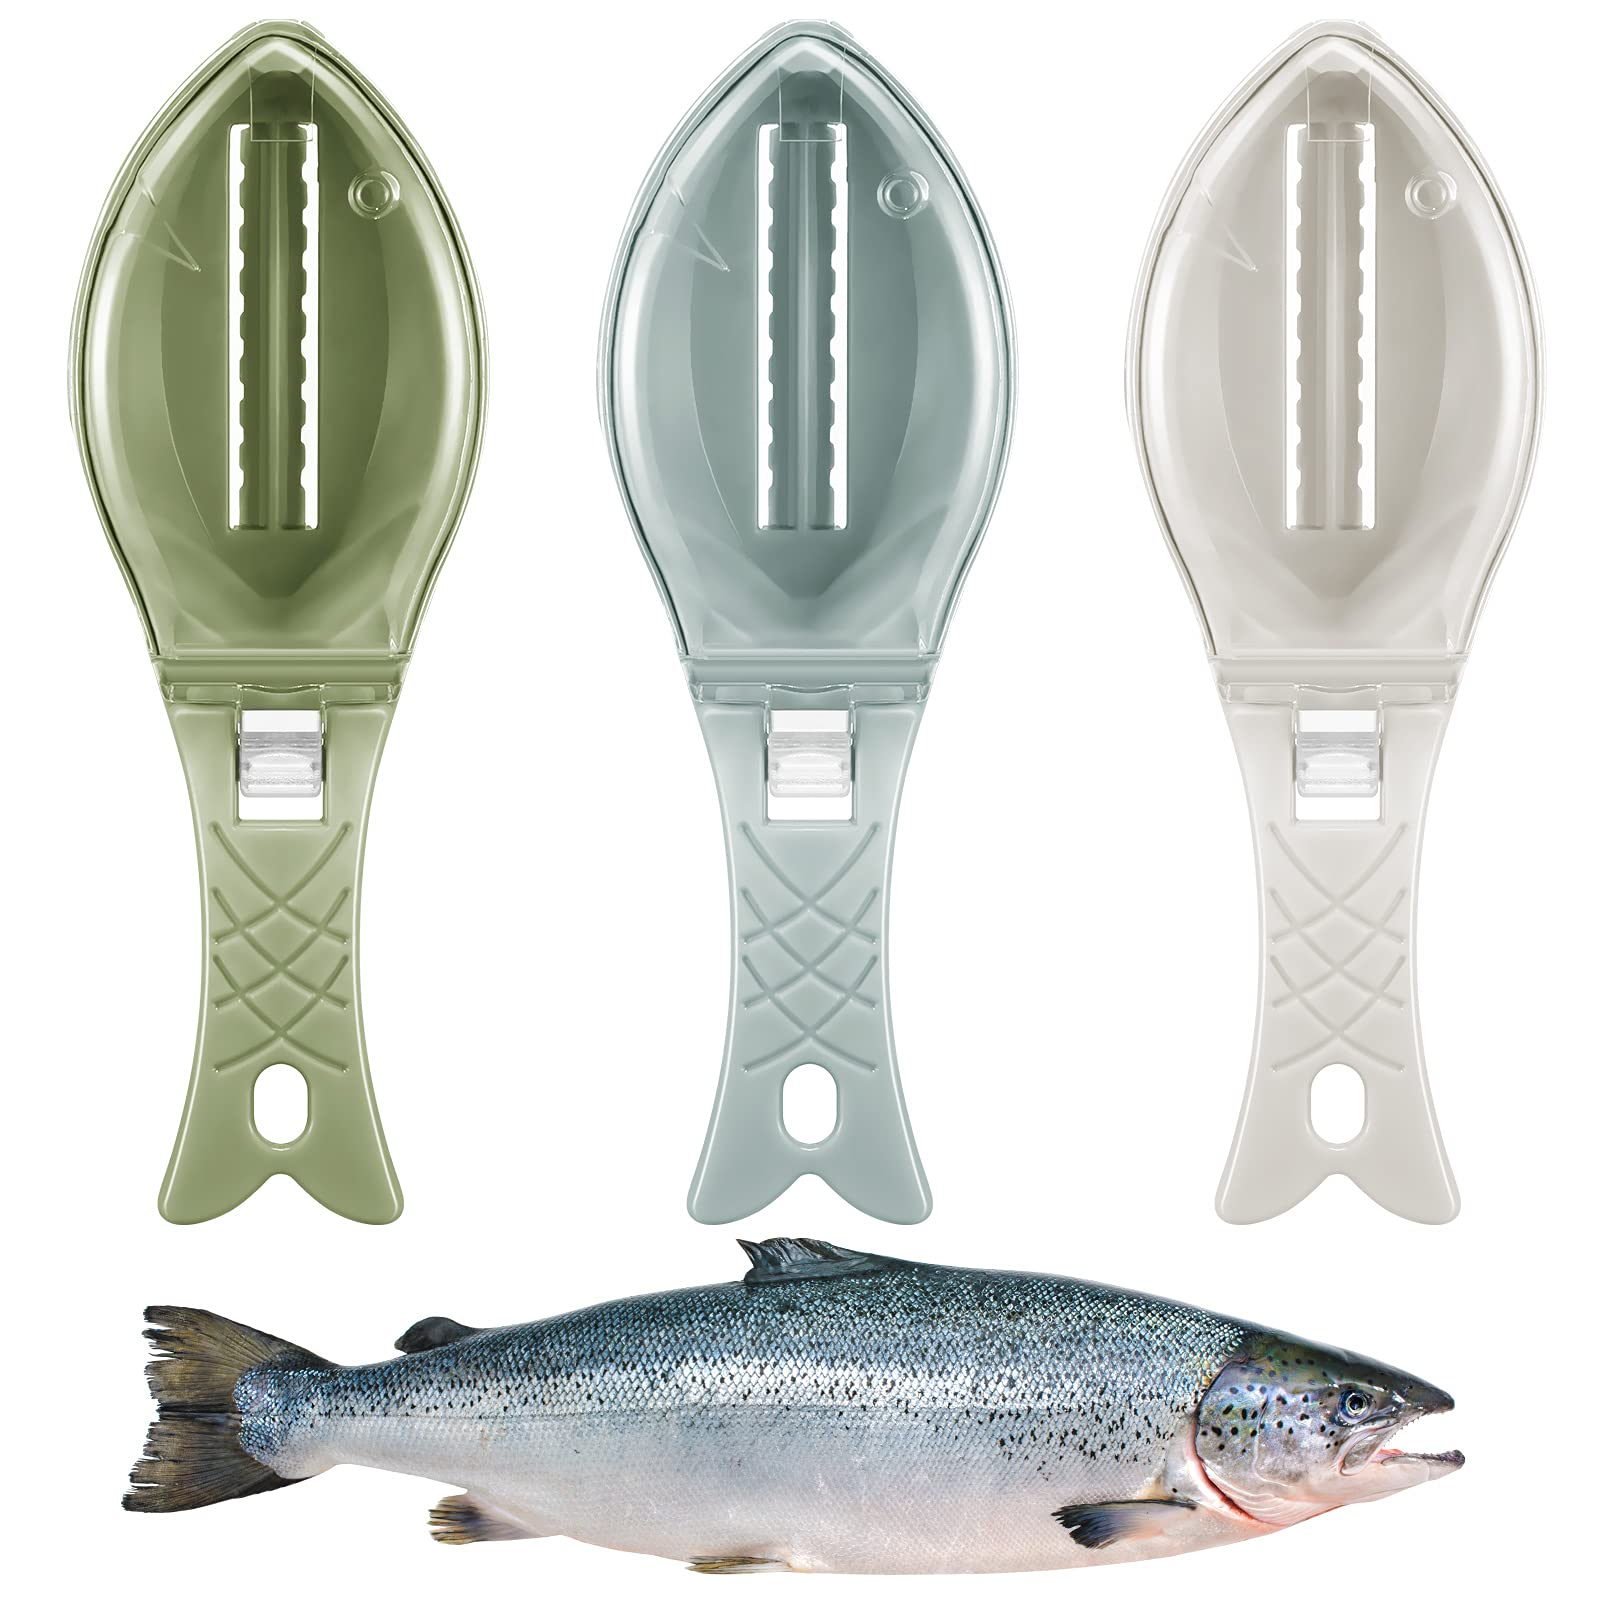 Three fish-shaped scale removers are displayed in white, green, and blue colors, lying flat and showcasing their design.